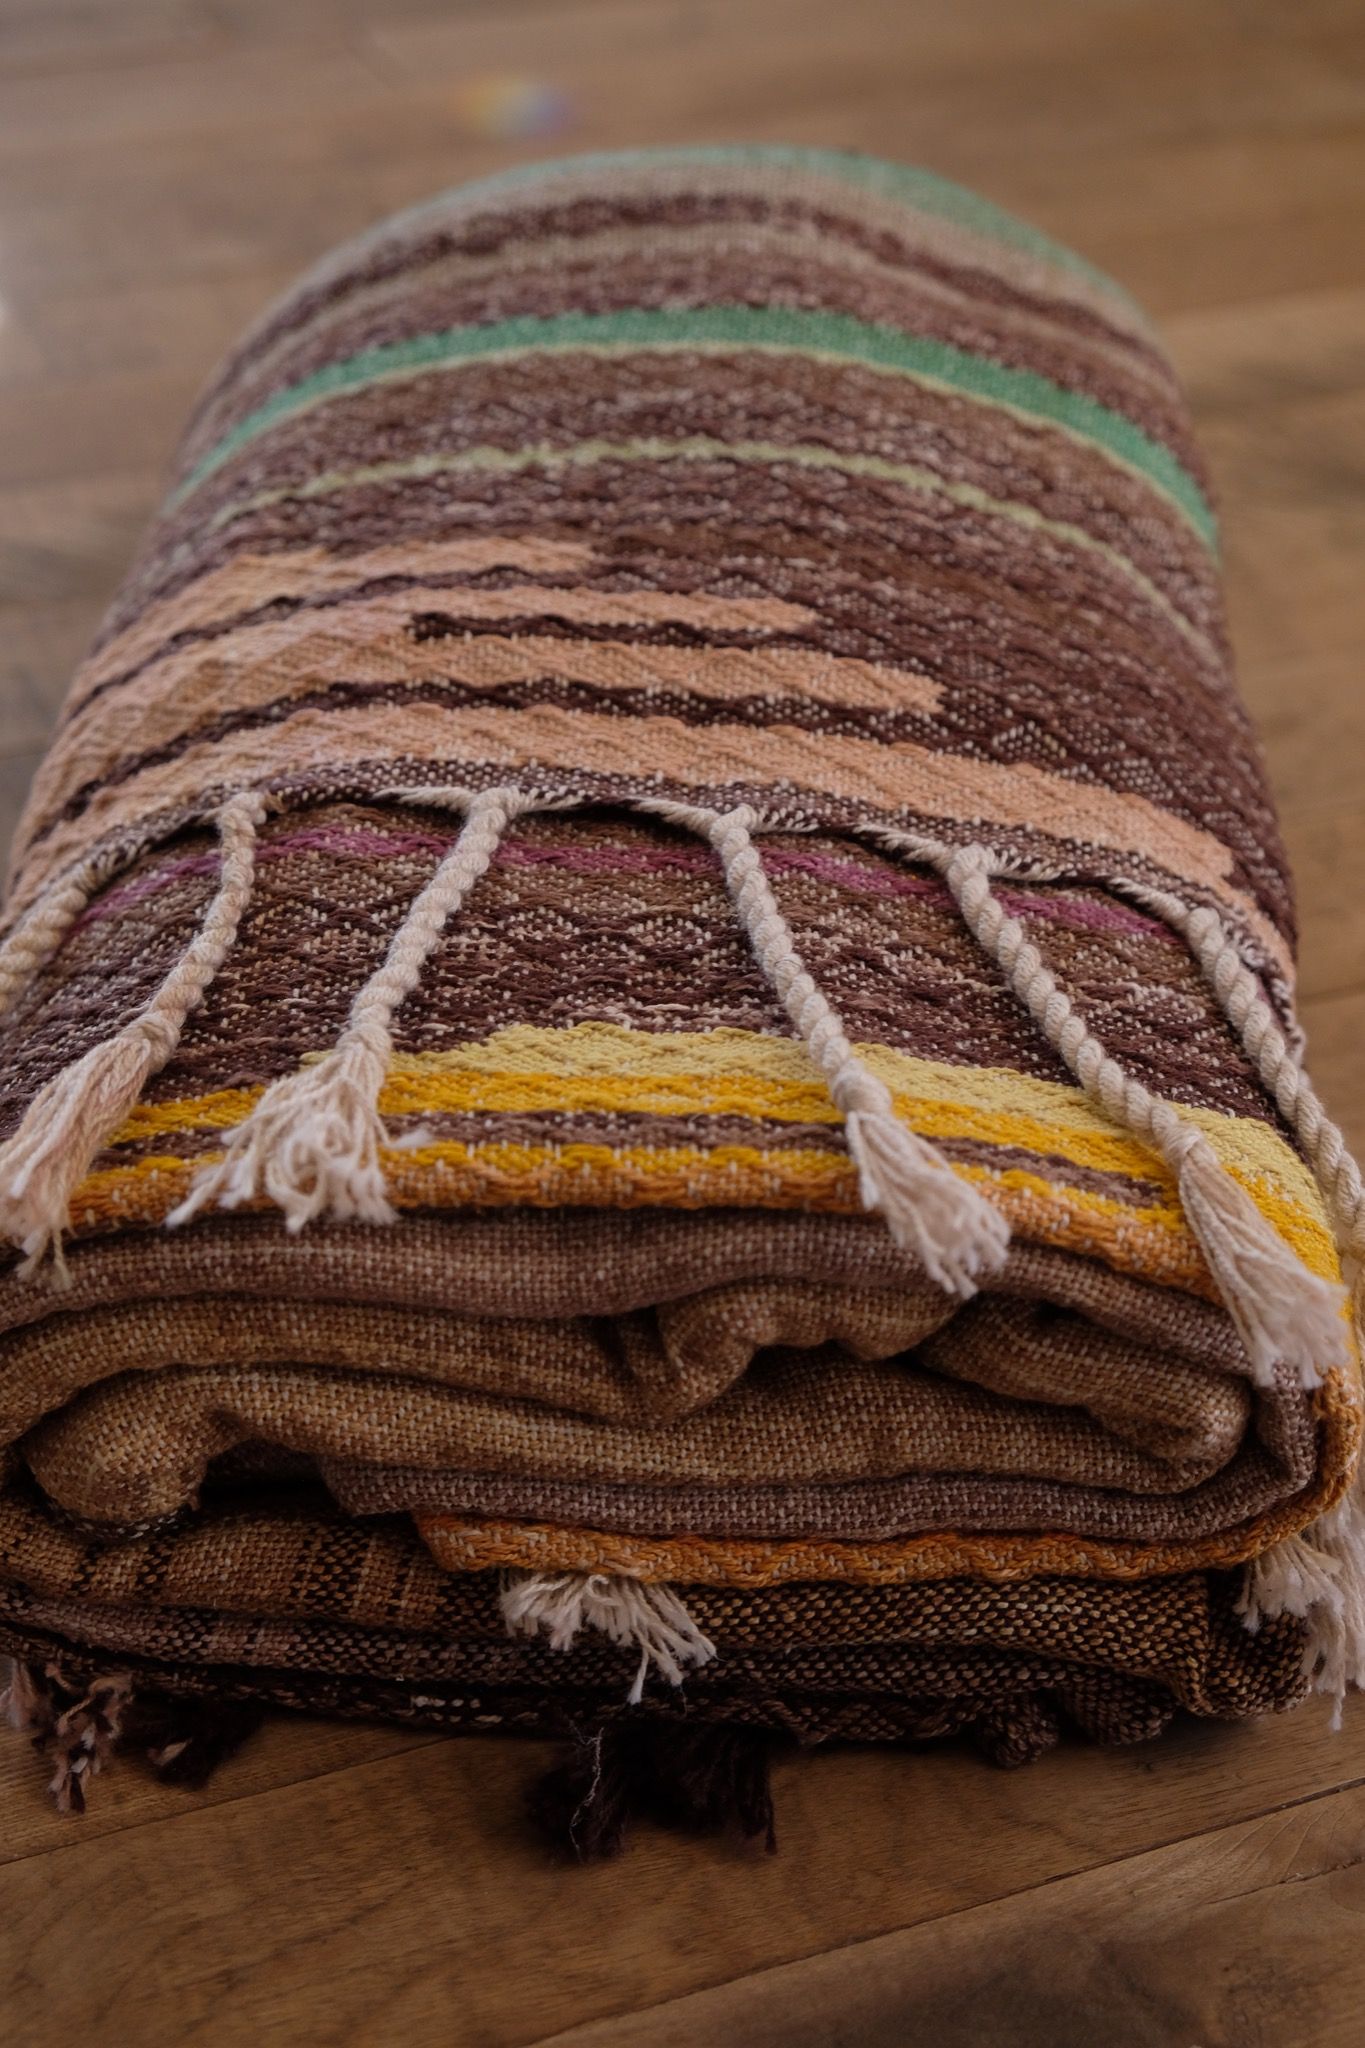 detail of Handwoven raw silk fabric with textures diamond weave in browns, tans, purples, blues, yellows, pink and orange laying on a wooden floor